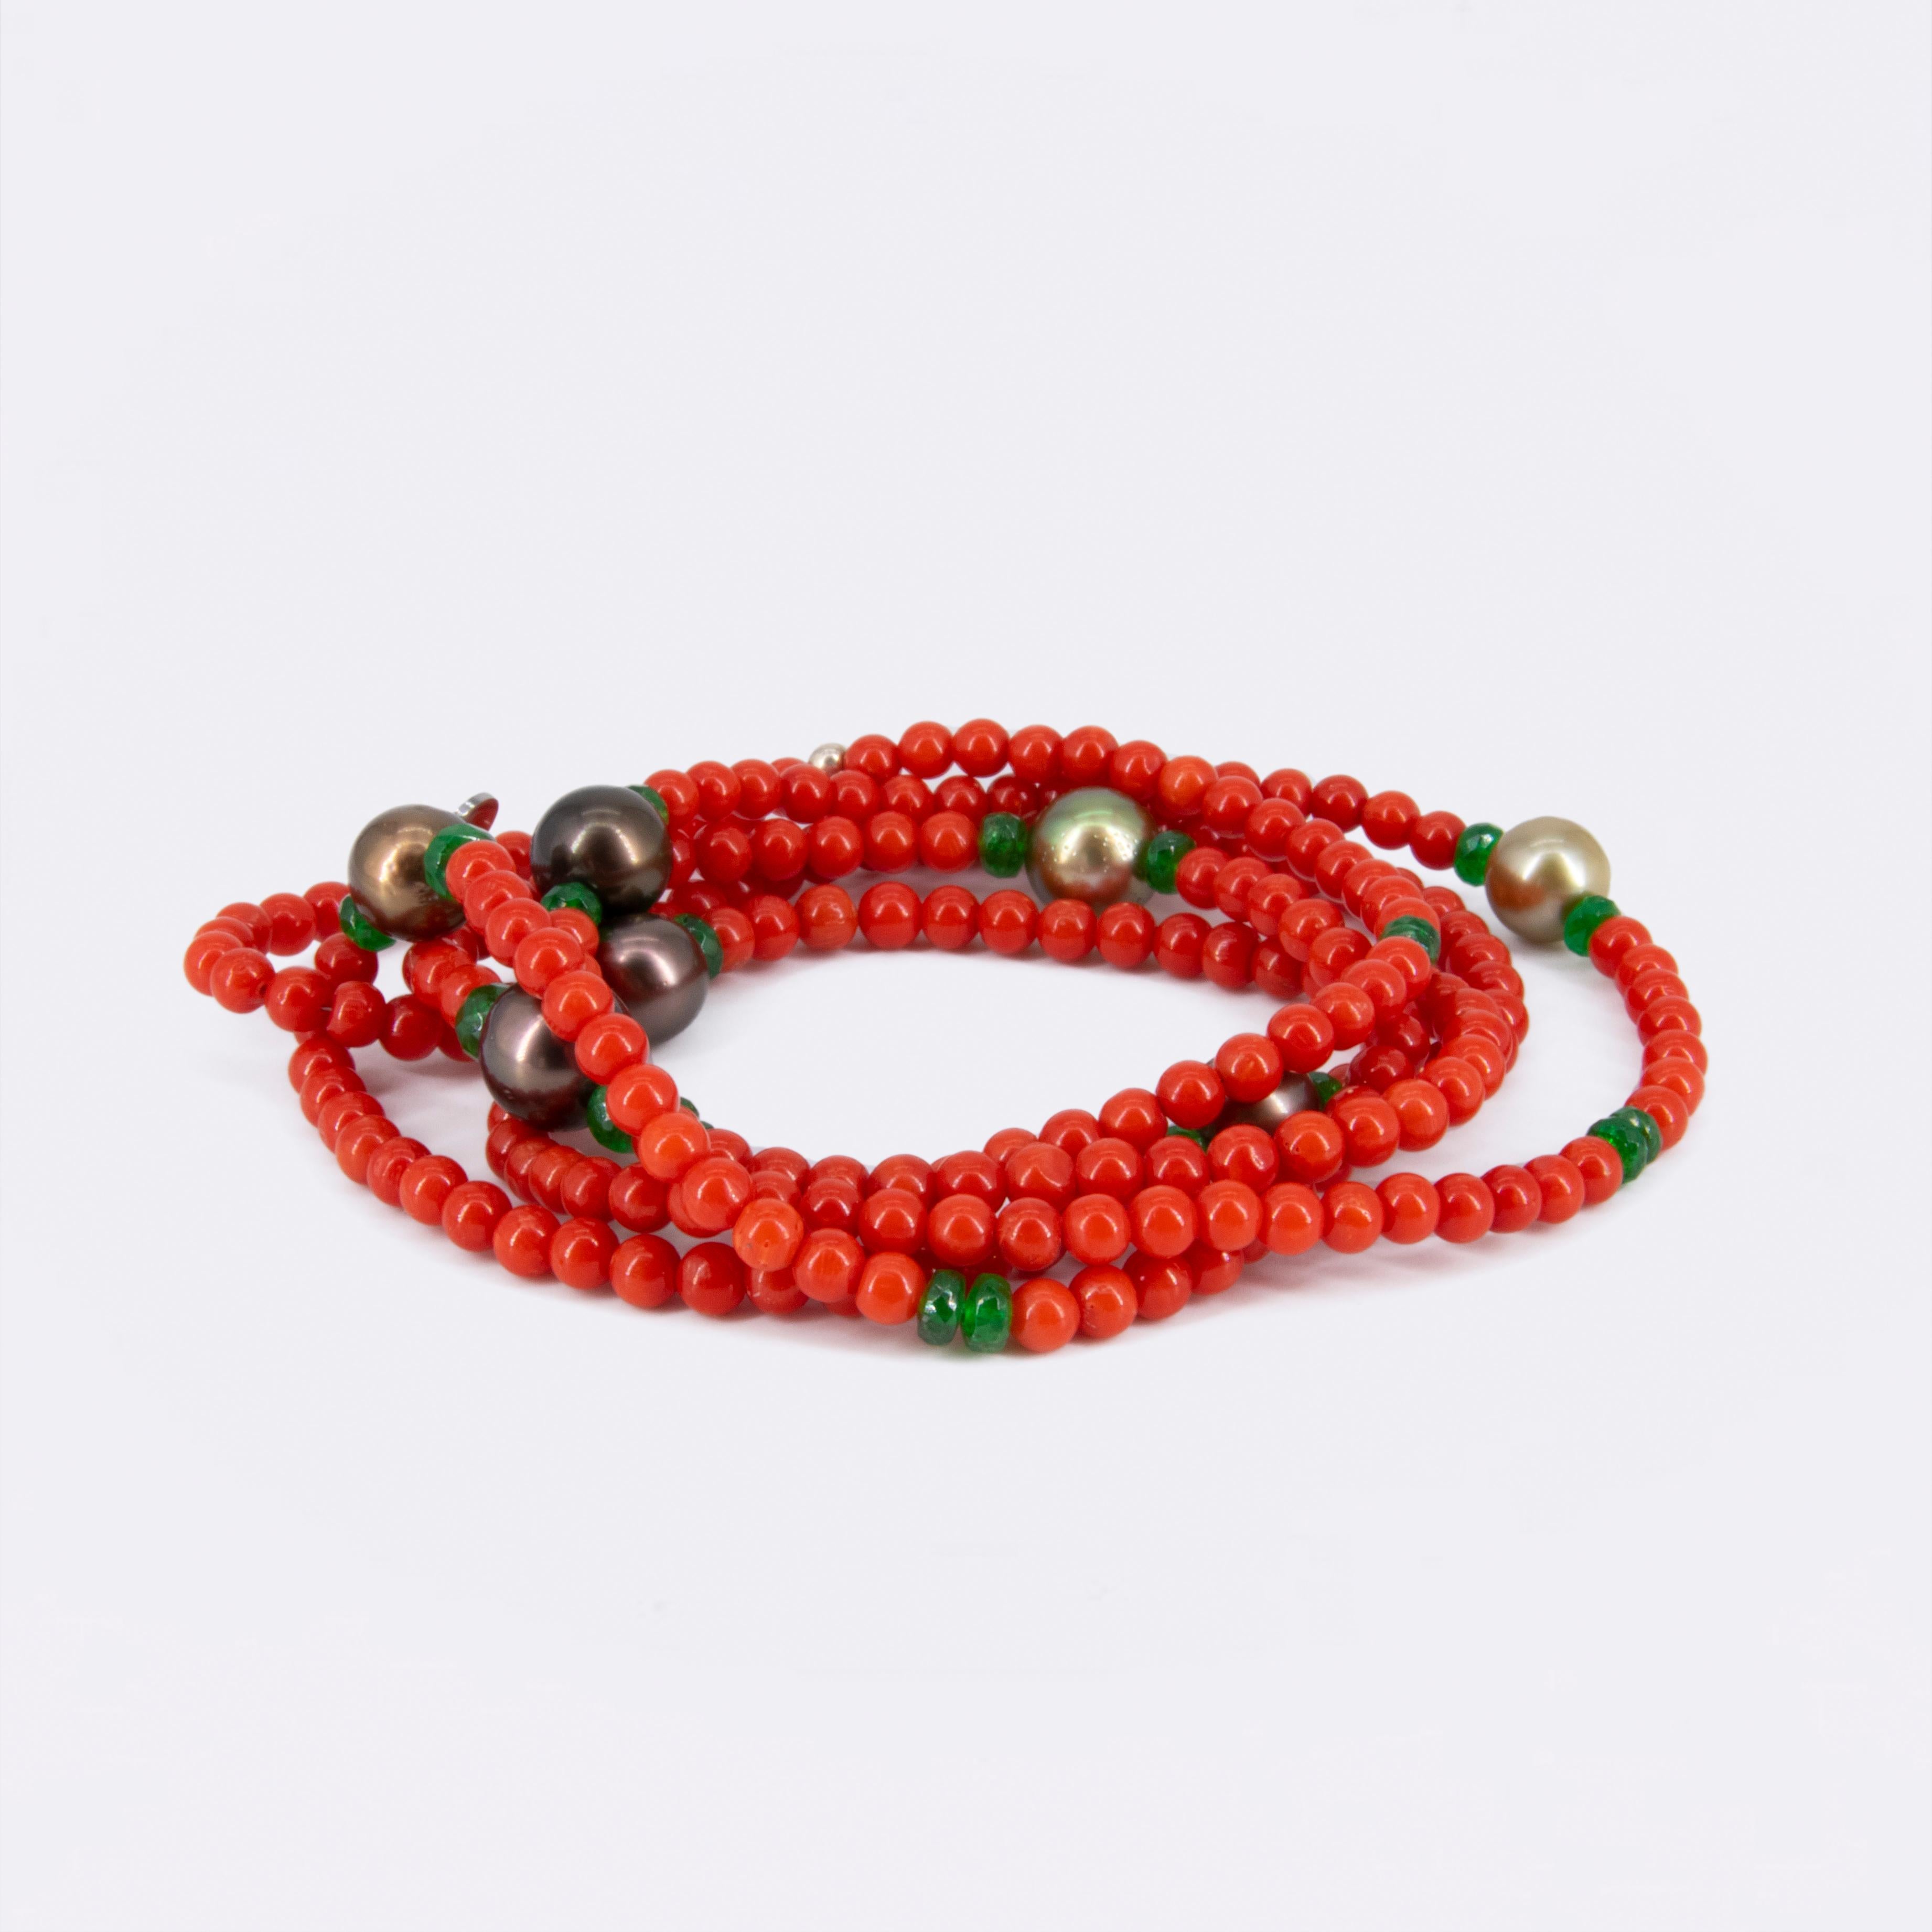 Mediterranen coral (naturally red, not dyed) and pearls do belong together. In this necklace,  AAA Tahitian pearls in a blue and greenish shimmer have been used to give the 4 mm coral beads the habitat of the sea. The toxic green tsavorites